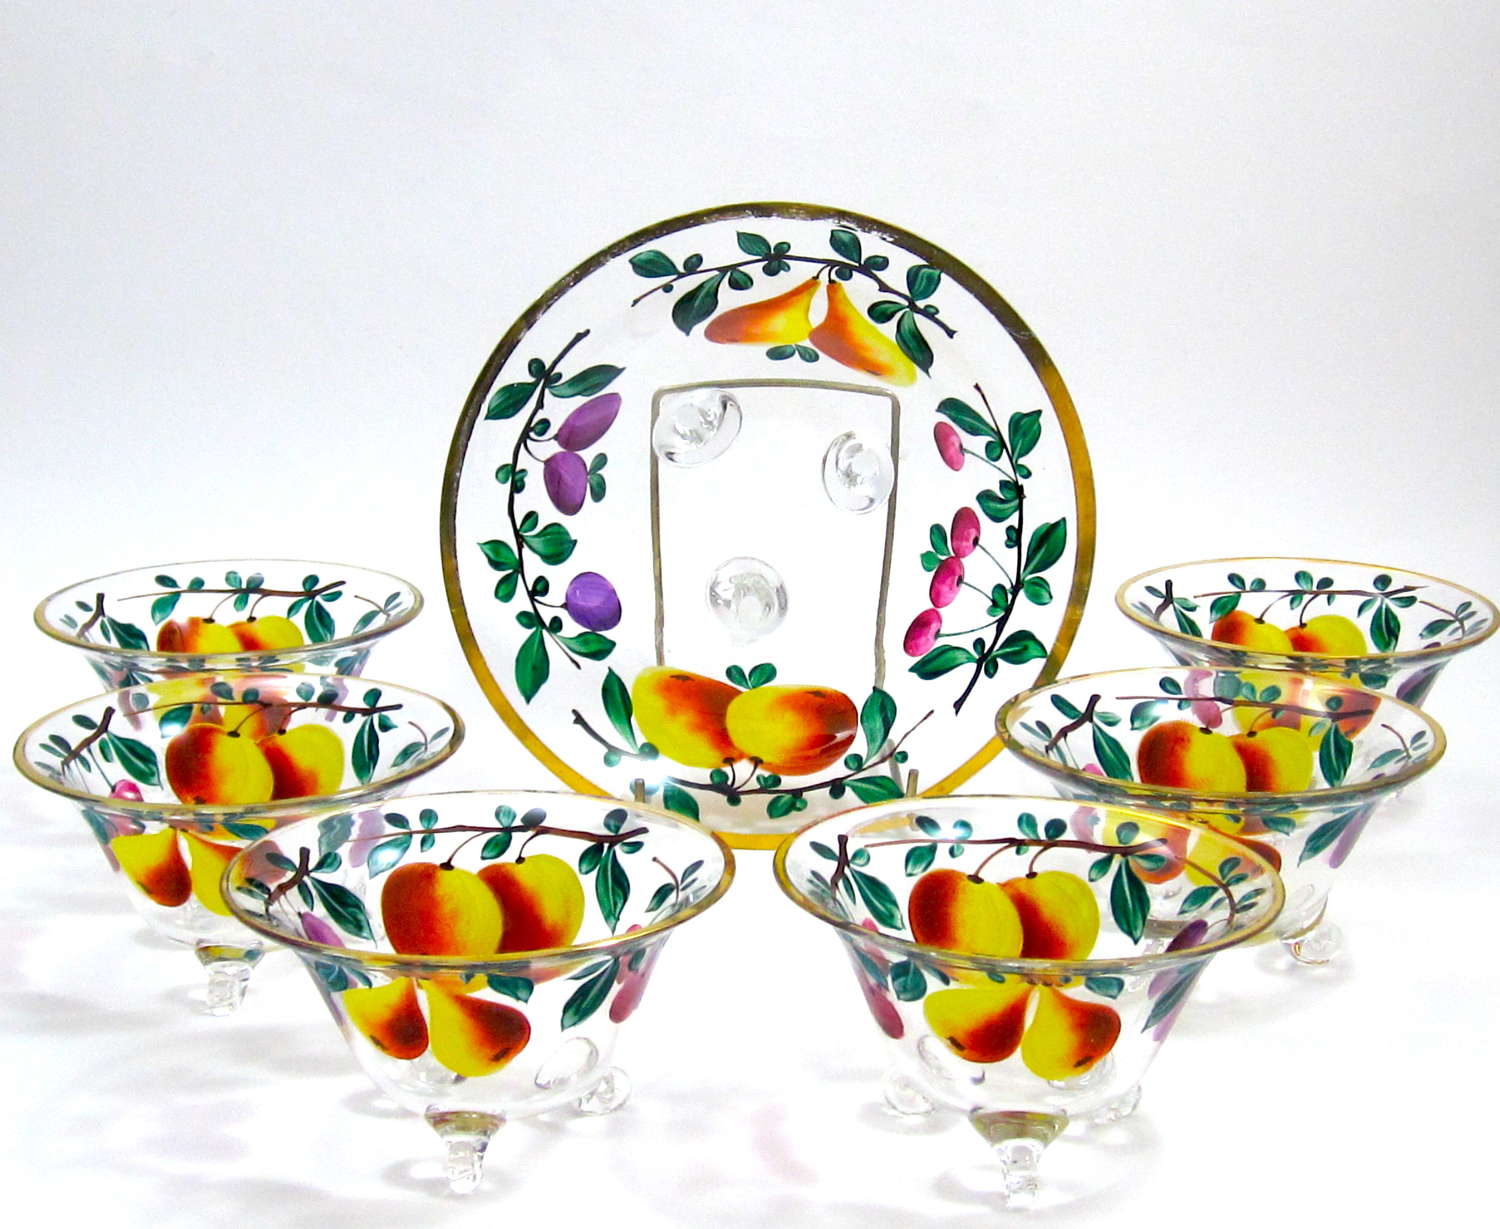 Antique Bohemian MOSER Enamelled Glass Set of Bowls with Applied Scrol